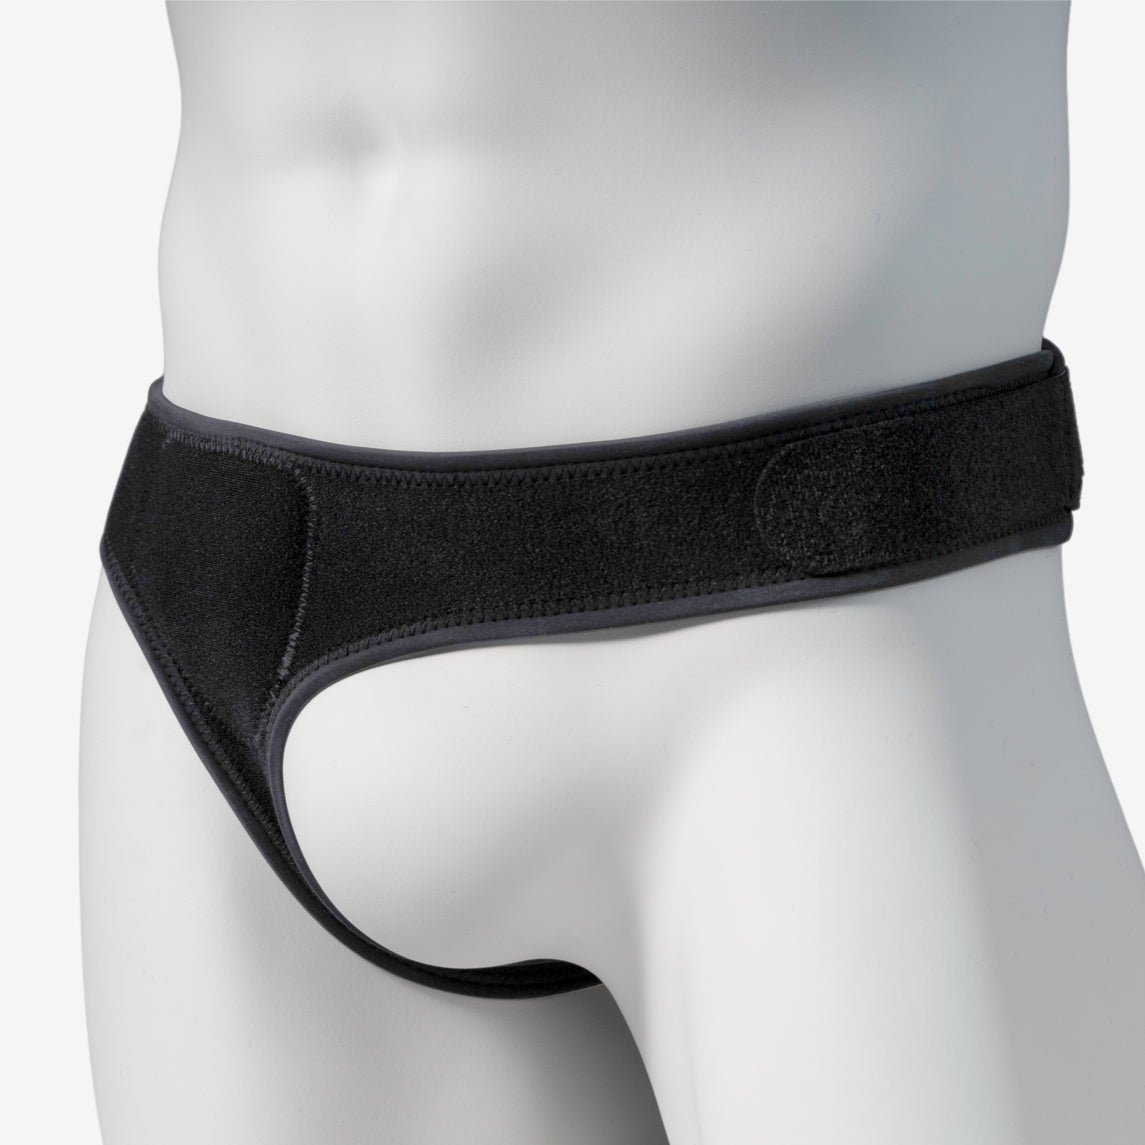 Wholesale Inguinal Hernia Belt For Professional Therapists Needs 